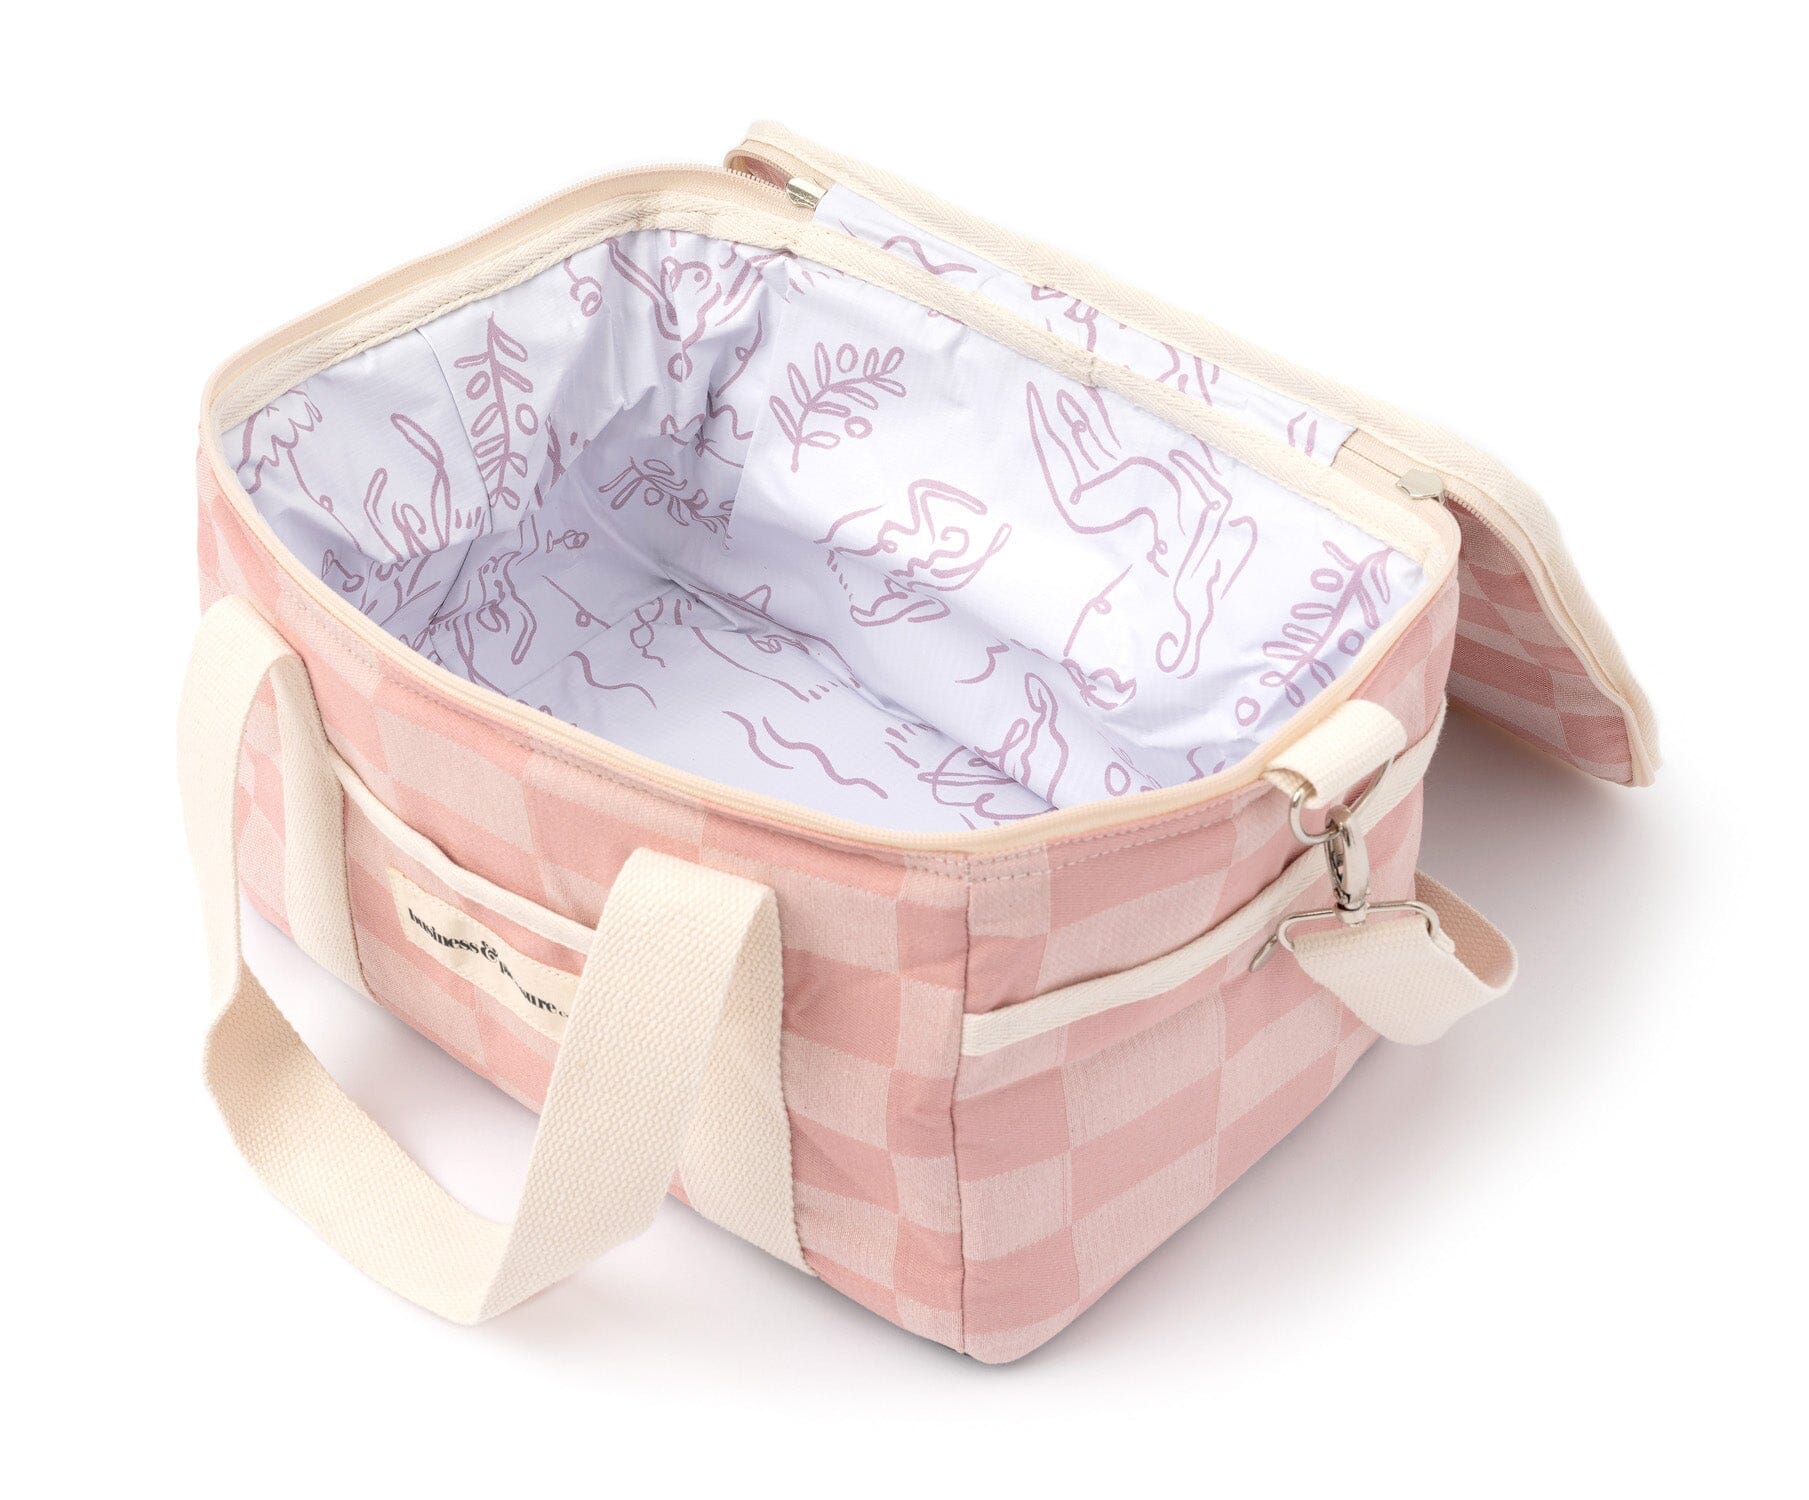 The Premium Cooler Bag - Dusty Pink Check